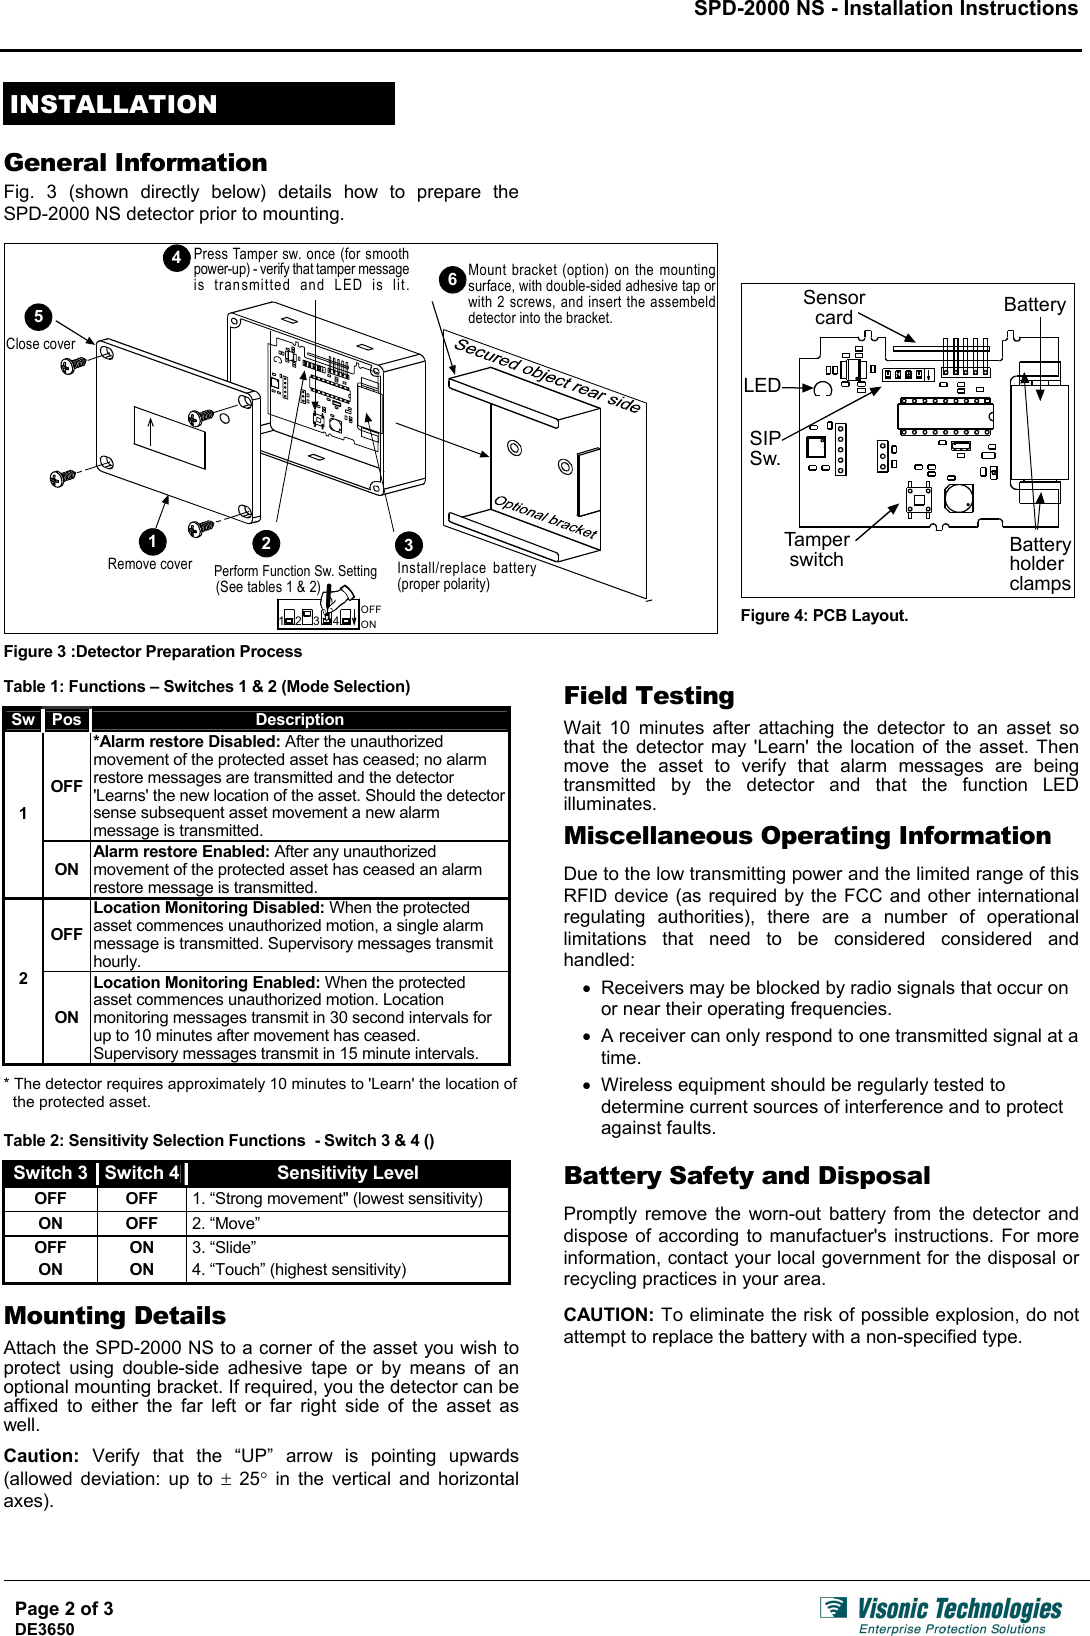 SPD-2000 NS - Installation Instructions     INSTALLATION  General Information Fig. 3 (shown directly below) details how to prepare the  SPD-2000 NS detector prior to mounting.     1Remove cover2Install/replace battery(proper polarity)4ONOFF231Perform Function Sw. Setting(See tables 1 &amp; 2)34Mount bracket (option) on the mountingsurface, with double-sided adhesive tap orwith 2 screws, and insert the assembelddetector into the bracket.5Press Tamper sw. once (for smoothpower-up) - verify that tamper messageis transmitted and LED is lit.Close cover6  Figure 3 :Detector Preparation Process  BatteryBatteryholderclampsTamperswitchSIPSw.SensorcardLED   Figure 4: PCB Layout.  Table 1: Functions – Switches 1 &amp; 2 (Mode Selection)  Page 2 of 3  Sw  Pos  Description OFF *Alarm restore Disabled: After the unauthorized movement of the protected asset has ceased; no alarm restore messages are transmitted and the detector &apos;Learns&apos; the new location of the asset. Should the detector sense subsequent asset movement a new alarm message is transmitted. 1 ON Alarm restore Enabled: After any unauthorized movement of the protected asset has ceased an alarm restore message is transmitted. OFF Location Monitoring Disabled: When the protected asset commences unauthorized motion, a single alarm message is transmitted. Supervisory messages transmit hourly. 2 ON Location Monitoring Enabled: When the protected asset commences unauthorized motion. Location monitoring messages transmit in 30 second intervals for up to 10 minutes after movement has ceased. Supervisory messages transmit in 15 minute intervals.  * The detector requires approximately 10 minutes to &apos;Learn&apos; the location of the protected asset.   Table 2: Sensitivity Selection Functions  - Switch 3 &amp; 4 ()  Switch 3  Switch 4  Sensitivity Level OFF OFF 1. “Strong movement&quot; (lowest sensitivity) ON OFF 2. “Move” OFF ON 3. “Slide” ON ON 4. “Touch” (highest sensitivity)  Mounting Details  Attach the SPD-2000 NS to a corner of the asset you wish to protect using double-side adhesive tape or by means of an optional mounting bracket. If required, you the detector can be affixed to either the far left or far right side of the asset as well.  Caution:  Verify that the “UP” arrow is pointing upwards (allowed deviation: up to ± 25° in the vertical and horizontal axes).  Field Testing  Wait 10 minutes after attaching the detector to an asset so that the detector may &apos;Learn&apos; the location of the asset. Then move the asset to verify that alarm messages are being transmitted by the detector and that the function LED illuminates.  Miscellaneous Operating Information  Due to the low transmitting power and the limited range of this RFID device (as required by the FCC and other international regulating authorities), there are a number of operational limitations that need to be considered considered and handled: •  Receivers may be blocked by radio signals that occur on or near their operating frequencies. •  A receiver can only respond to one transmitted signal at a time. •  Wireless equipment should be regularly tested to determine current sources of interference and to protect against faults.  Battery Safety and Disposal  Promptly remove the worn-out battery from the detector and dispose of according to manufactuer&apos;s instructions. For more information, contact your local government for the disposal or recycling practices in your area.  CAUTION: To eliminate the risk of possible explosion, do not attempt to replace the battery with a non-specified type.     DE3650   